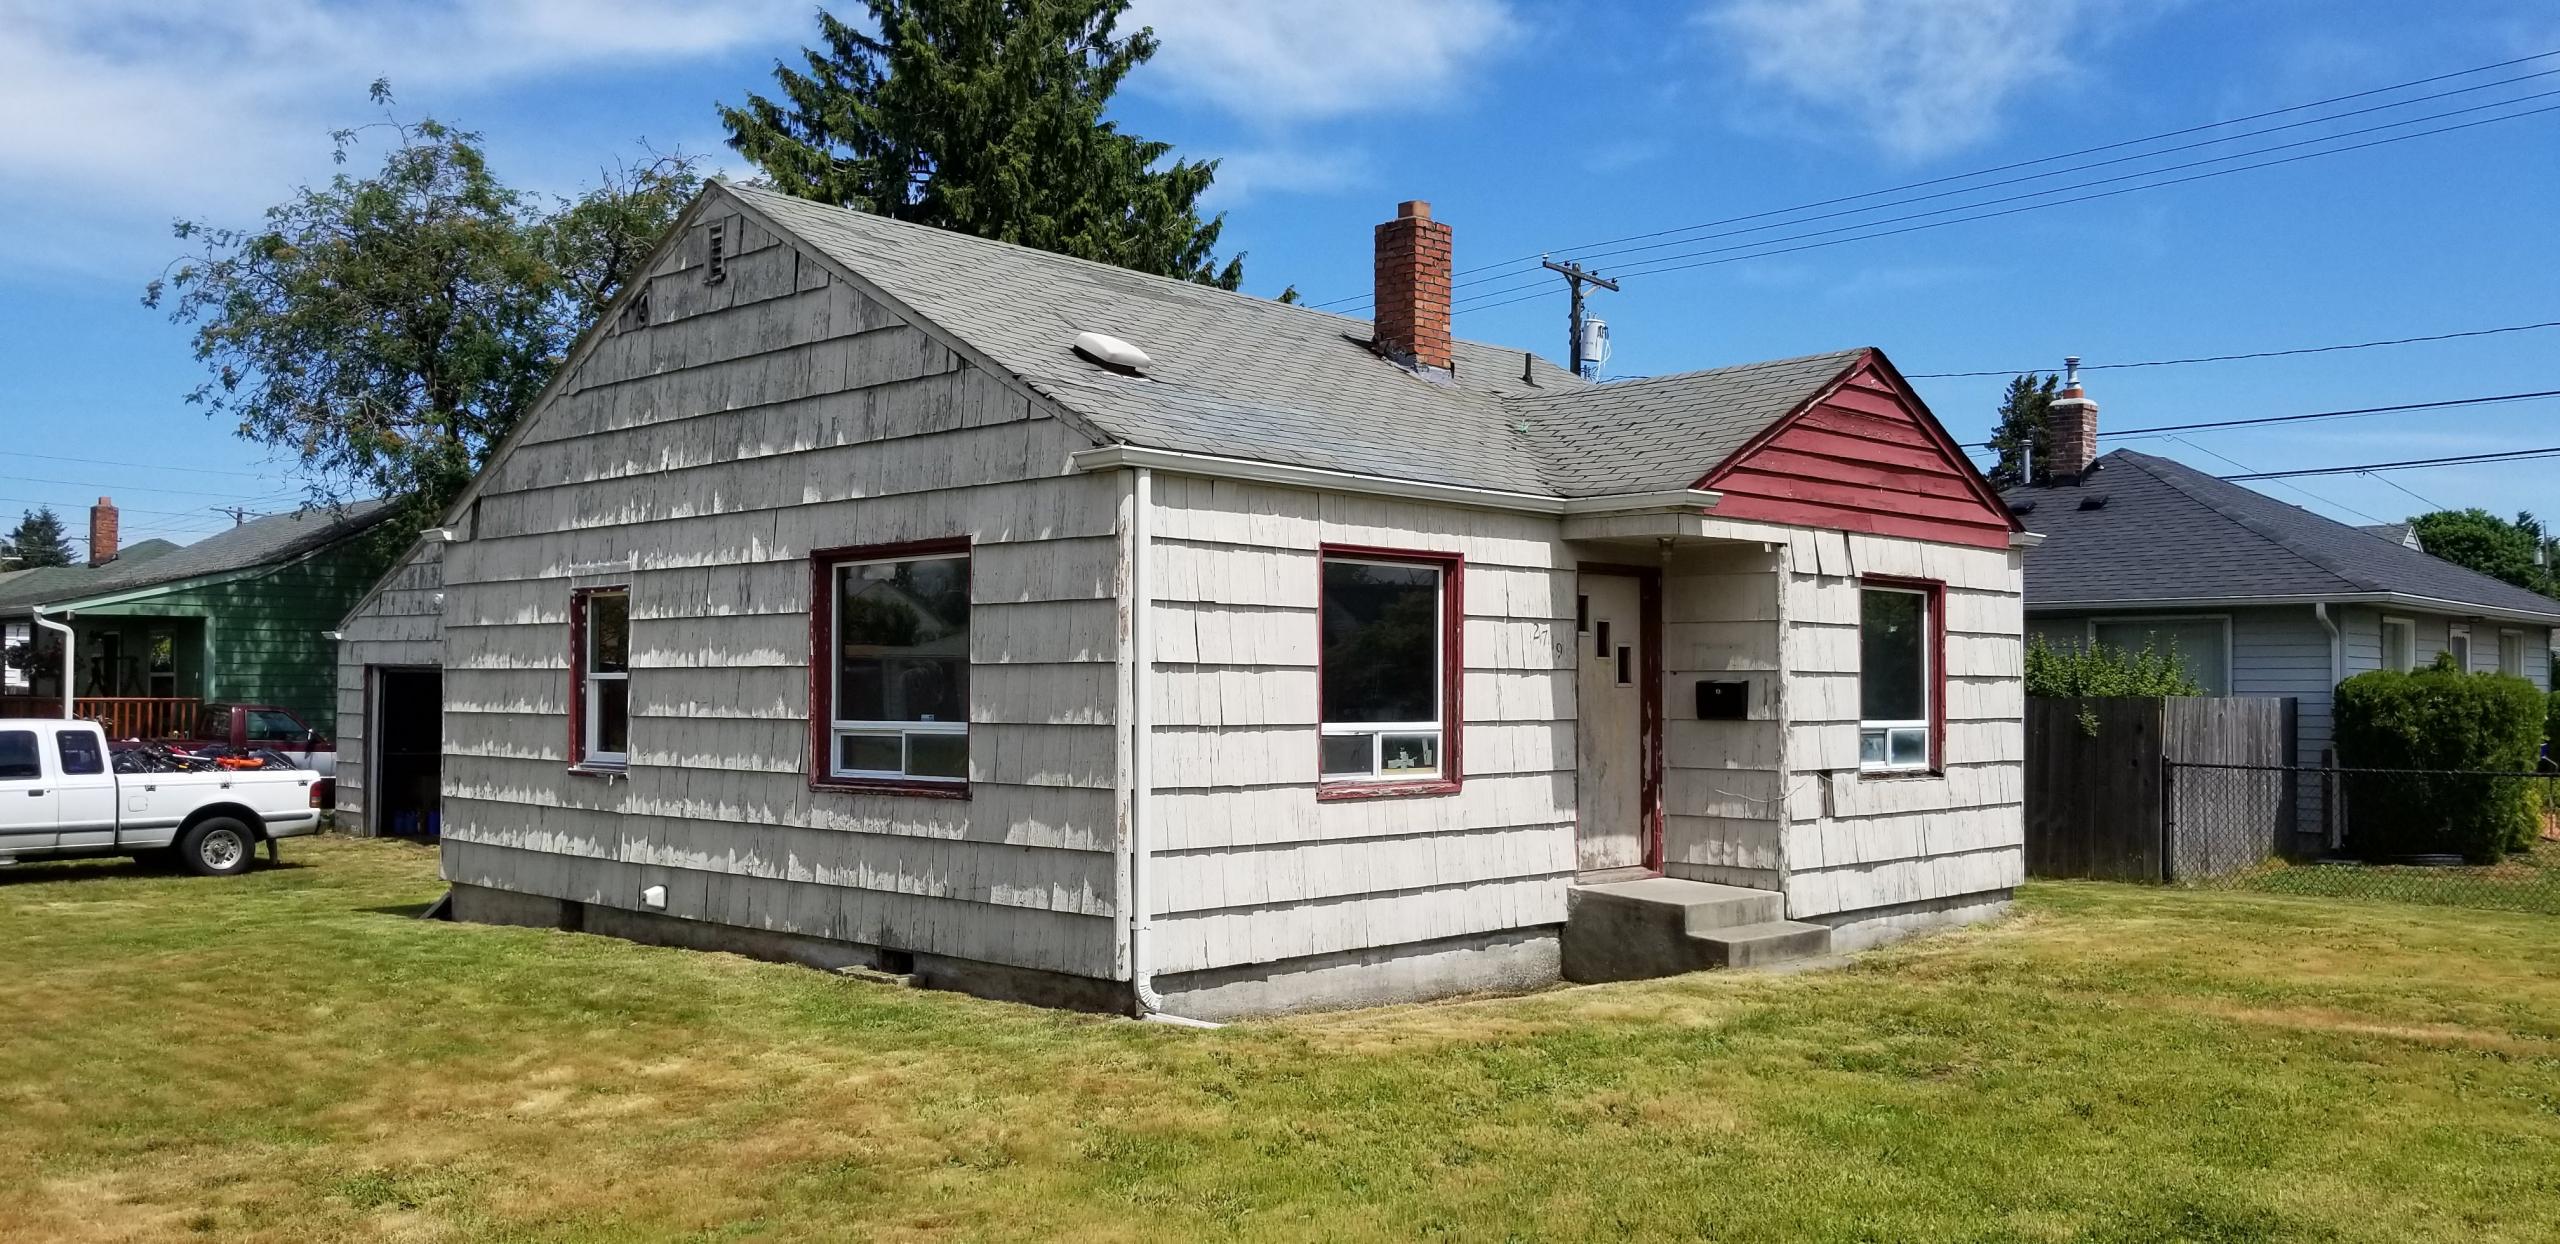 Tacoma Property Group Buys Distressed & Unwanted Homes For Cash & Pays Fast